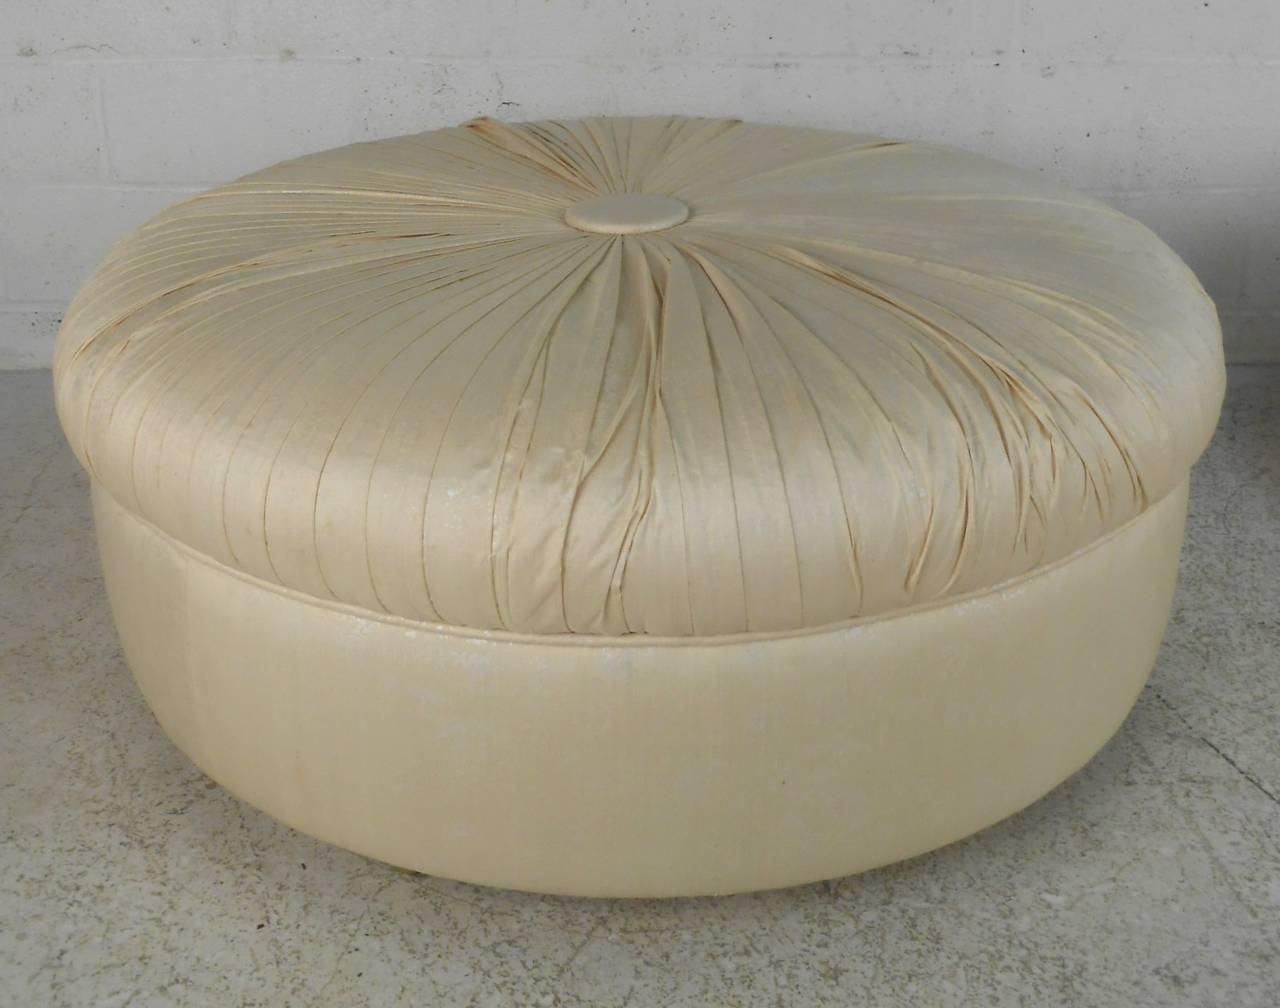 This listing is for a vintage ottoman, perfect for occasional seating or accent in any modern application. Unique design and size makes this a great find! Two available (one on wheels, one on rubber feet), however given price is for one. Contact for